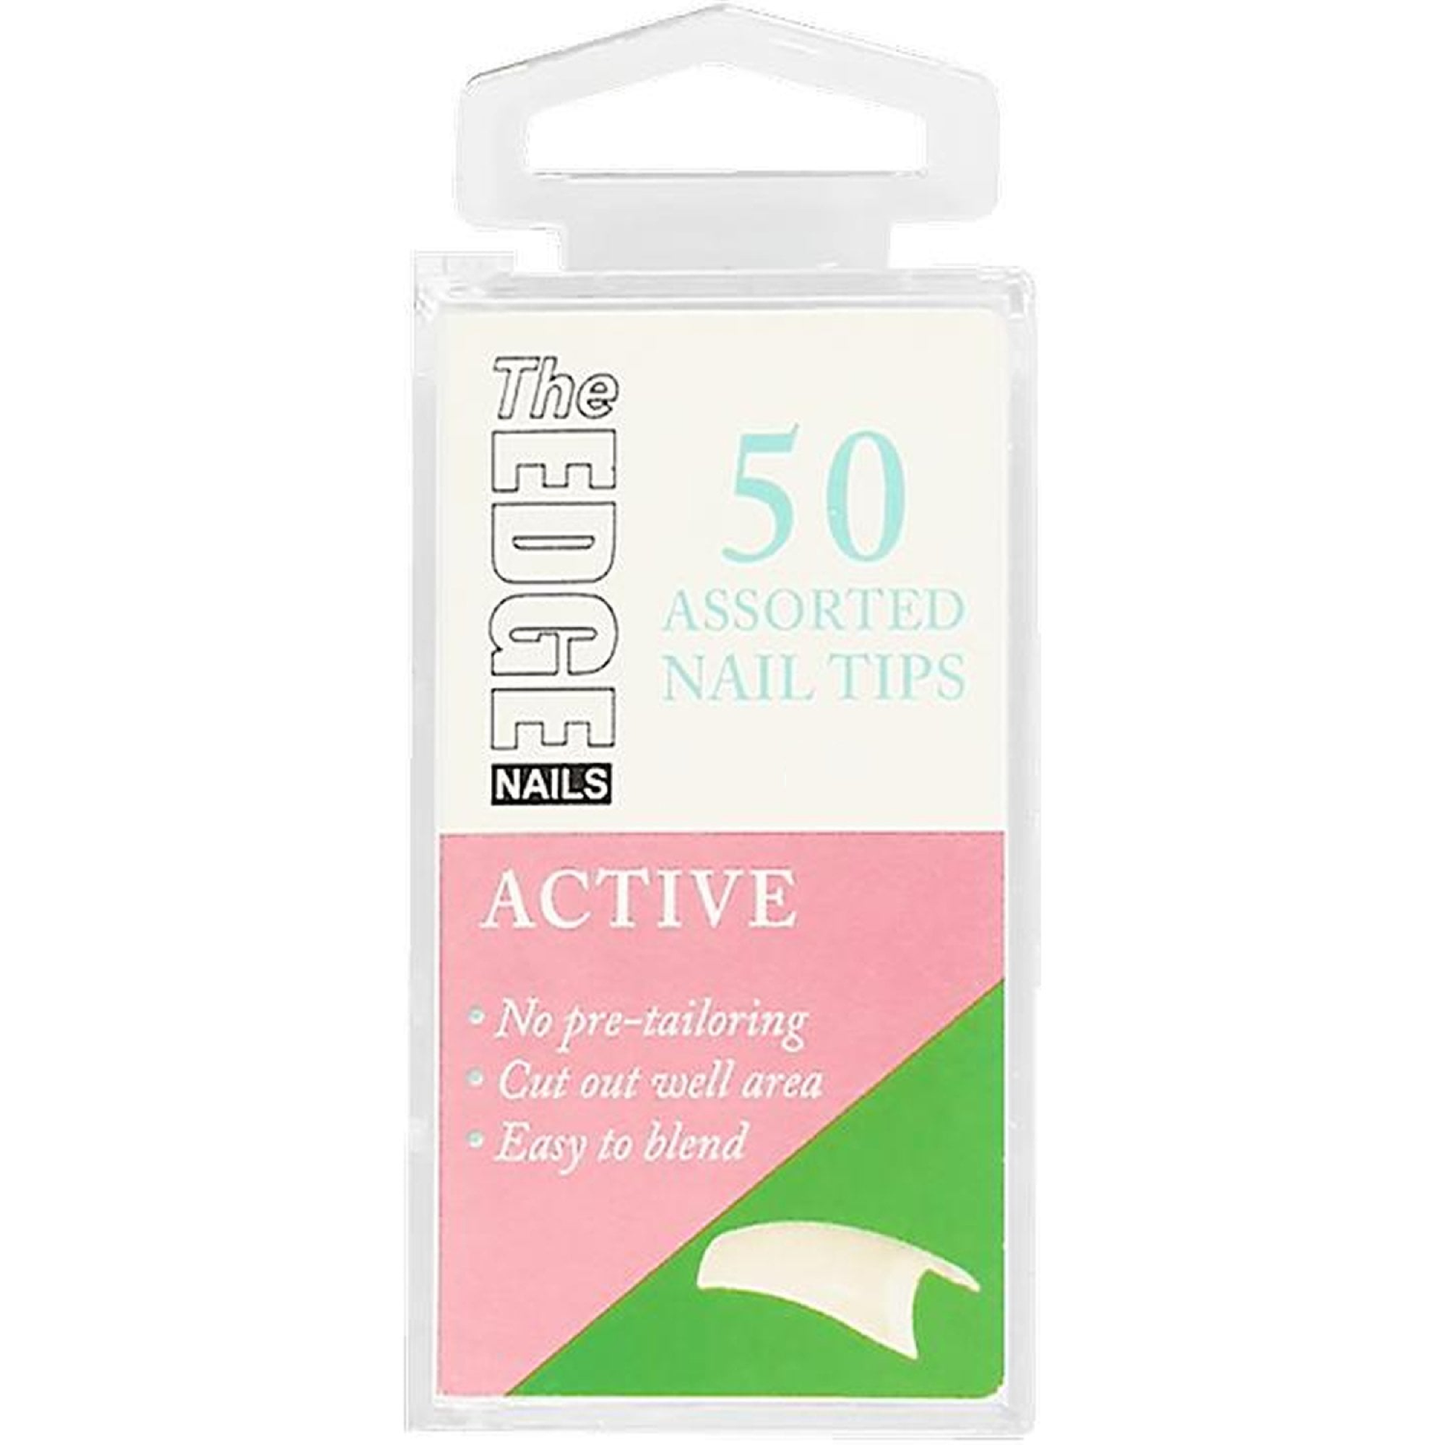 The Edge Active Nail Tips - Boxes of 50 Tips - Size 10 (SHOP)